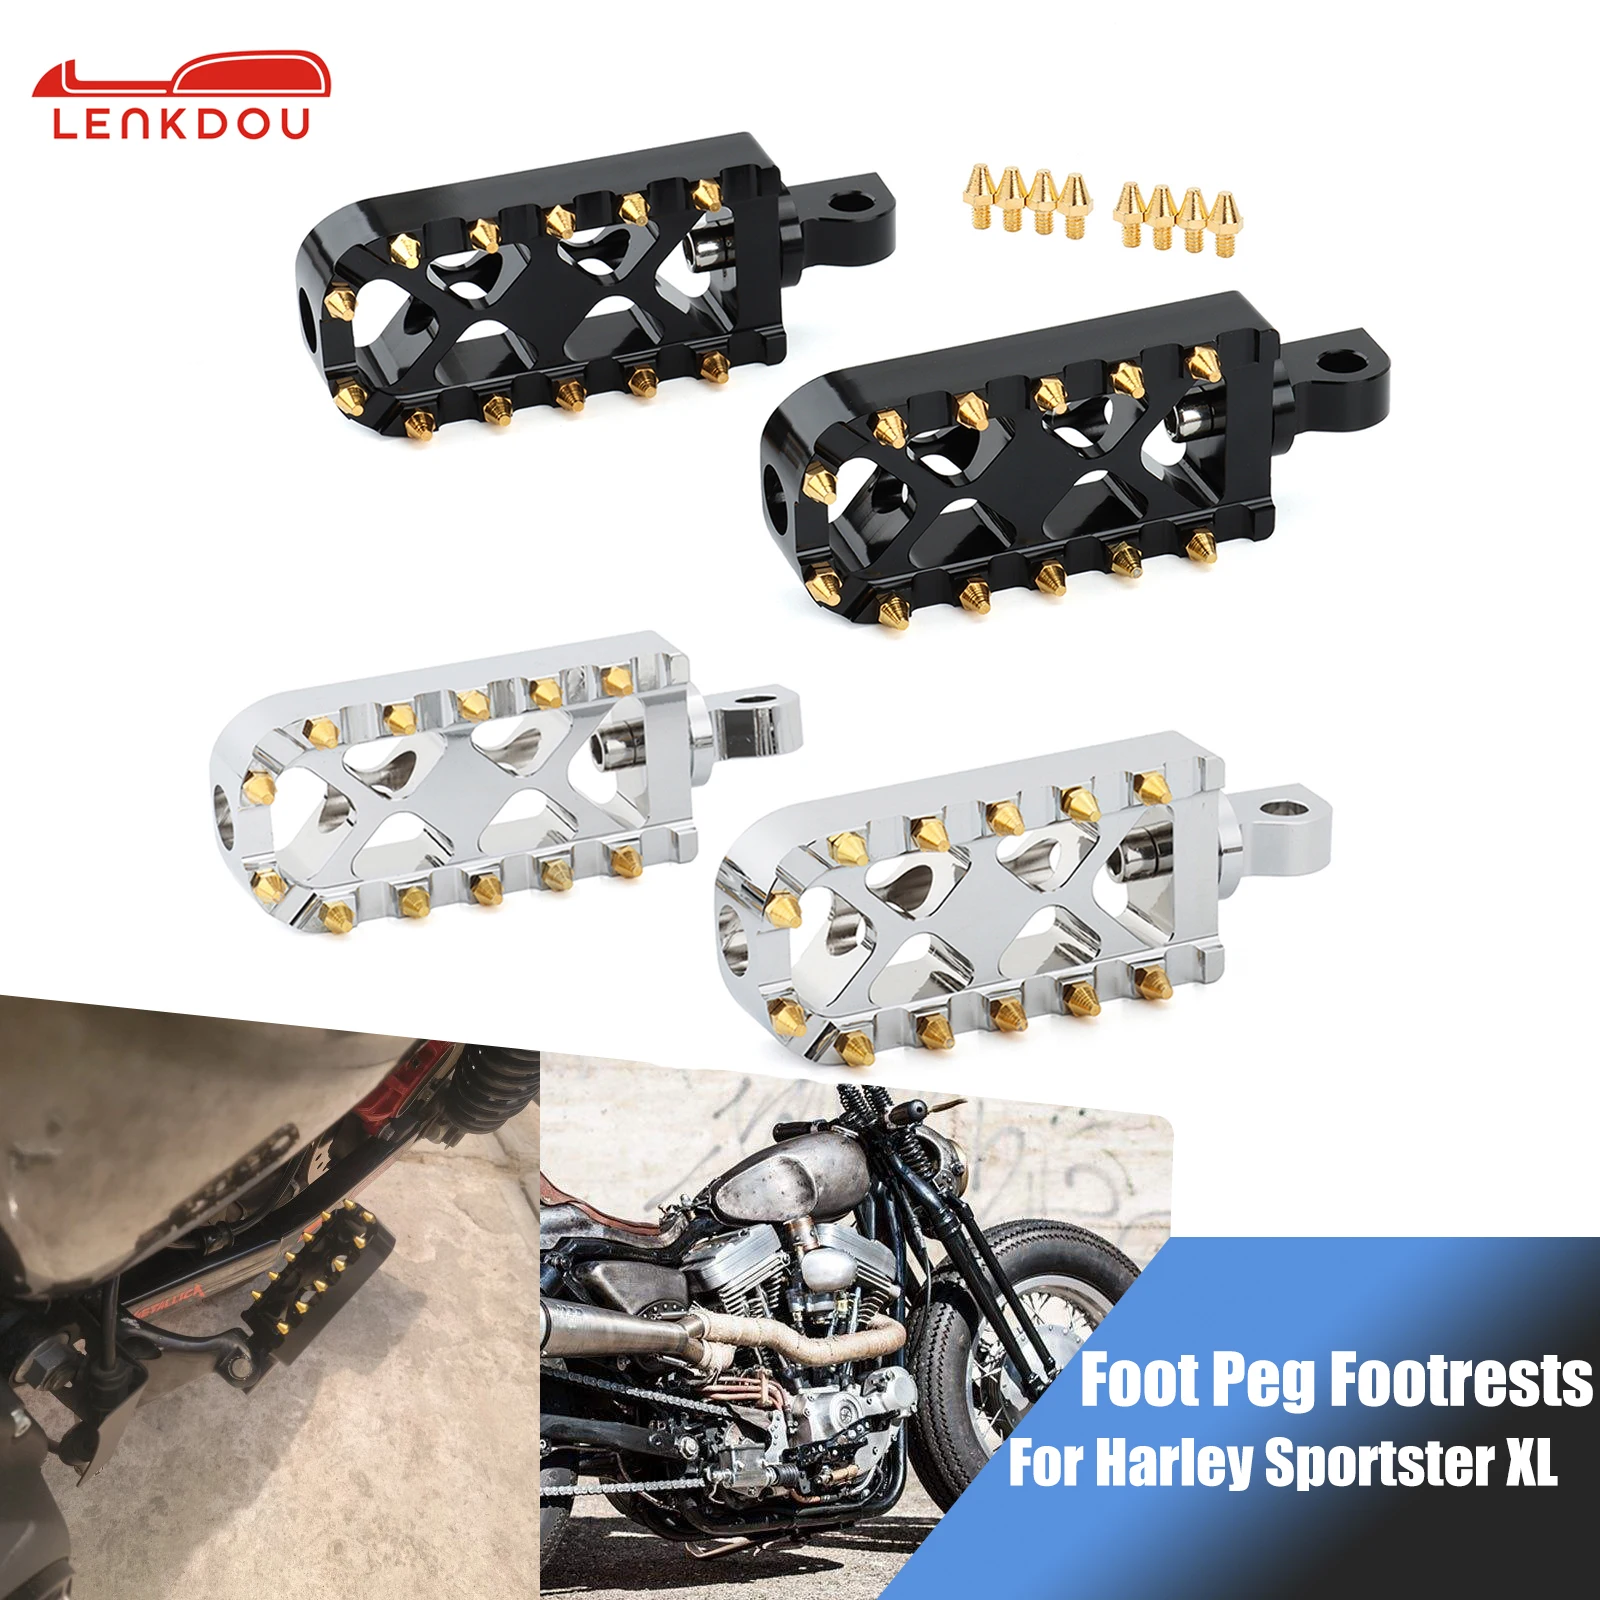 

MX Style Foot Pegs Footrest For Harley Dyna Fatboy Street Bob Wide Glide Sportster Softail Bobber Chopper Motorcycle Accessories